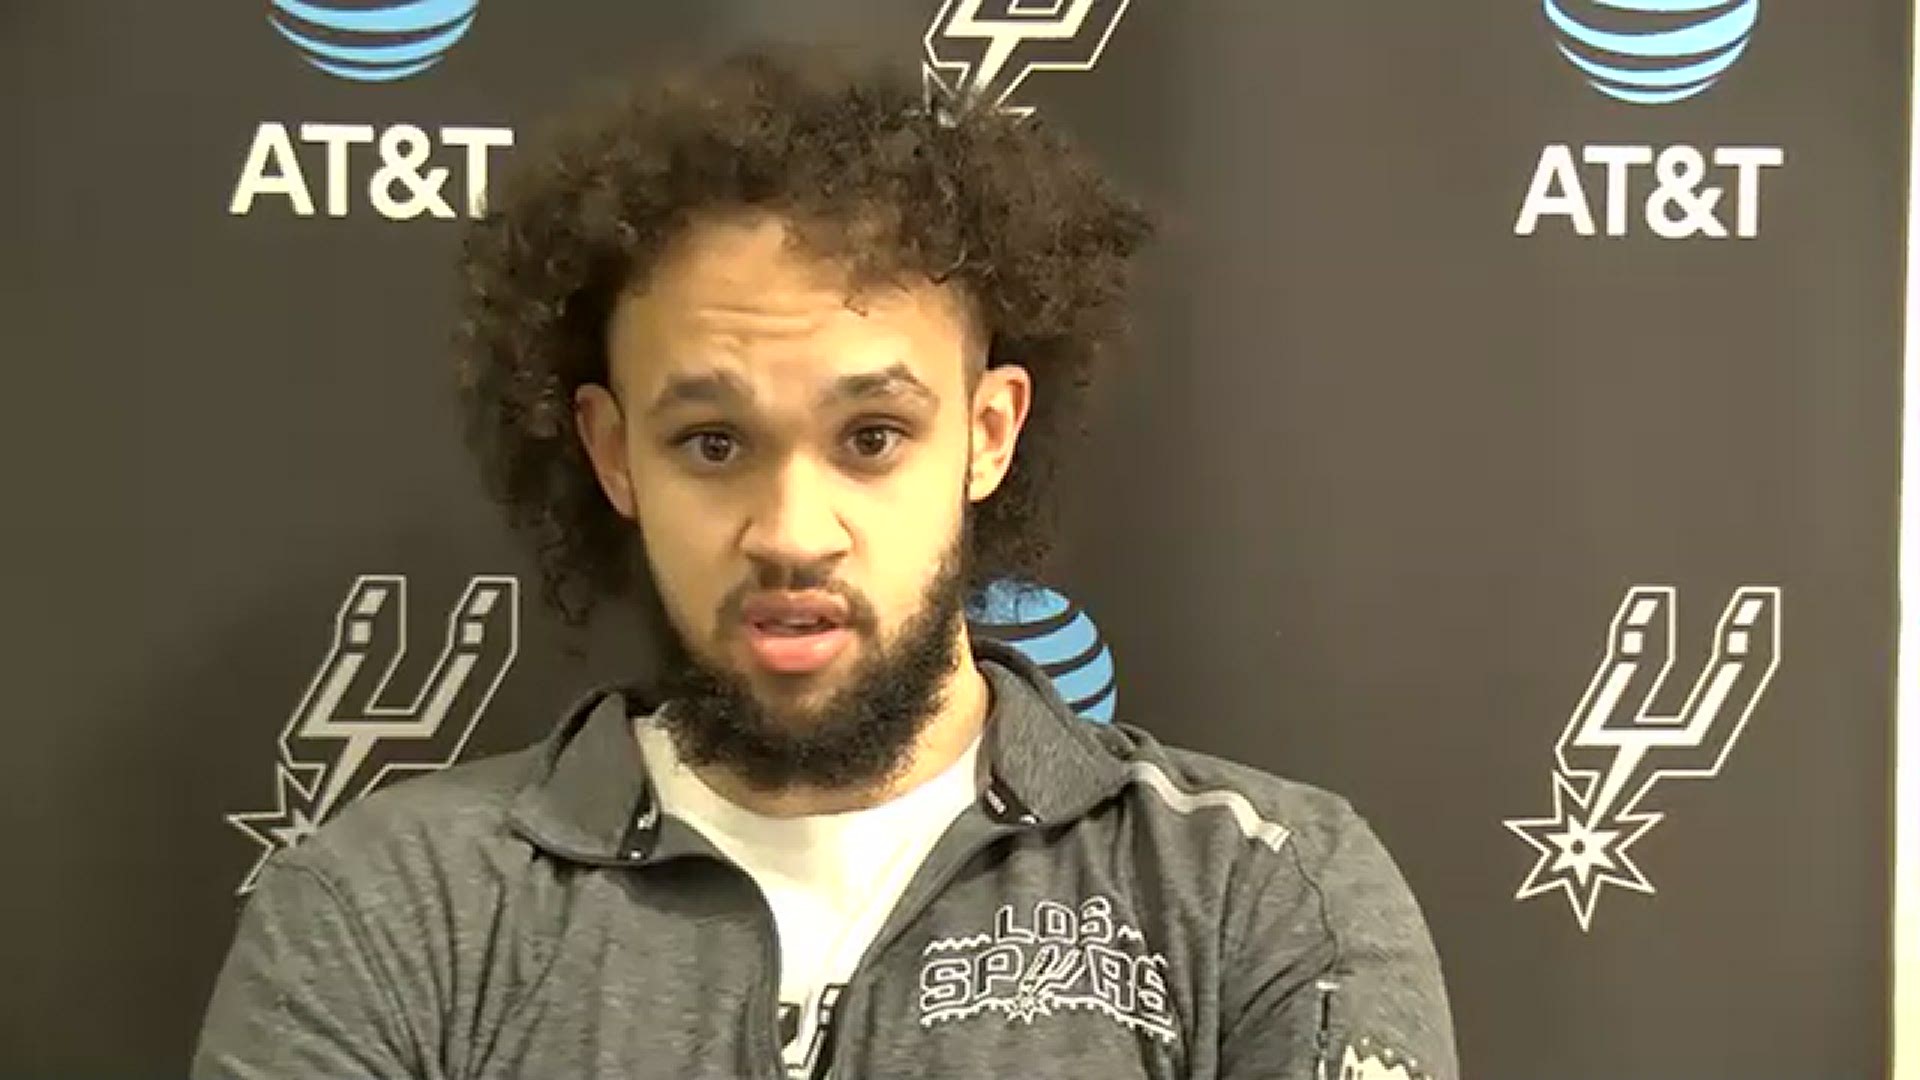 White spoke about the key to the hot start, and his chemistry with Dejounte Murray in the starting backcourt.